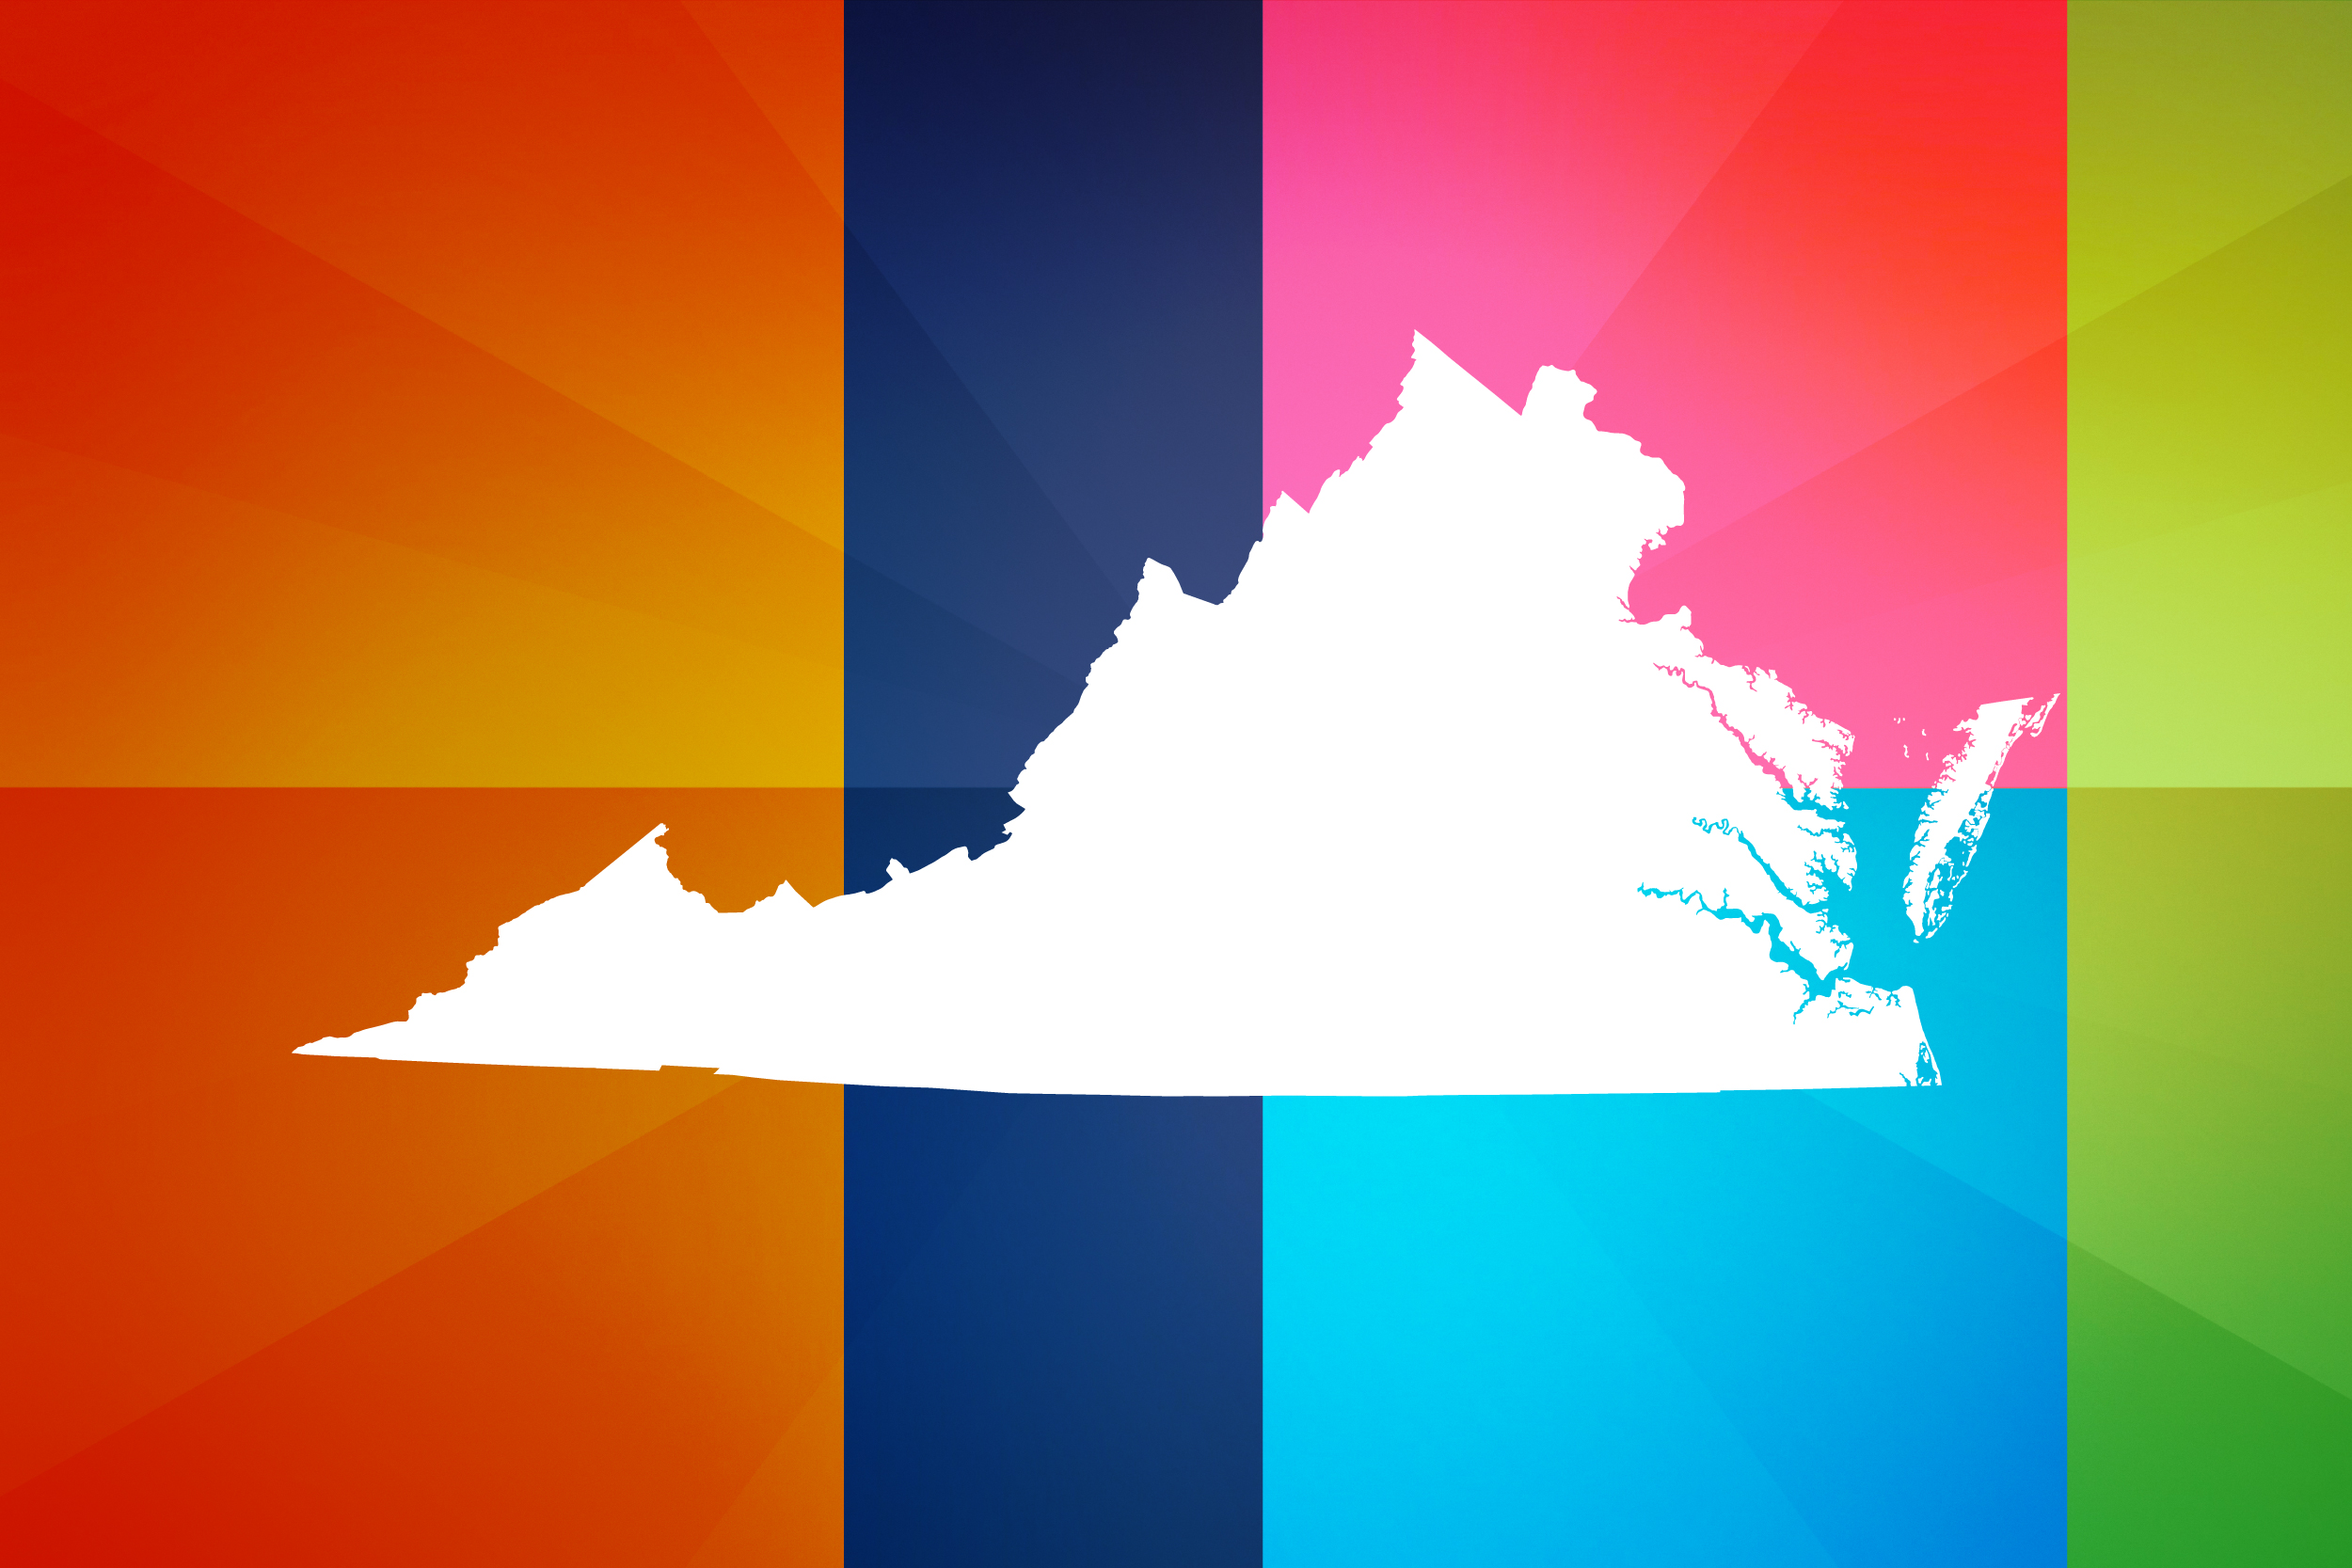 Virginia in the middle with different color squares as the background